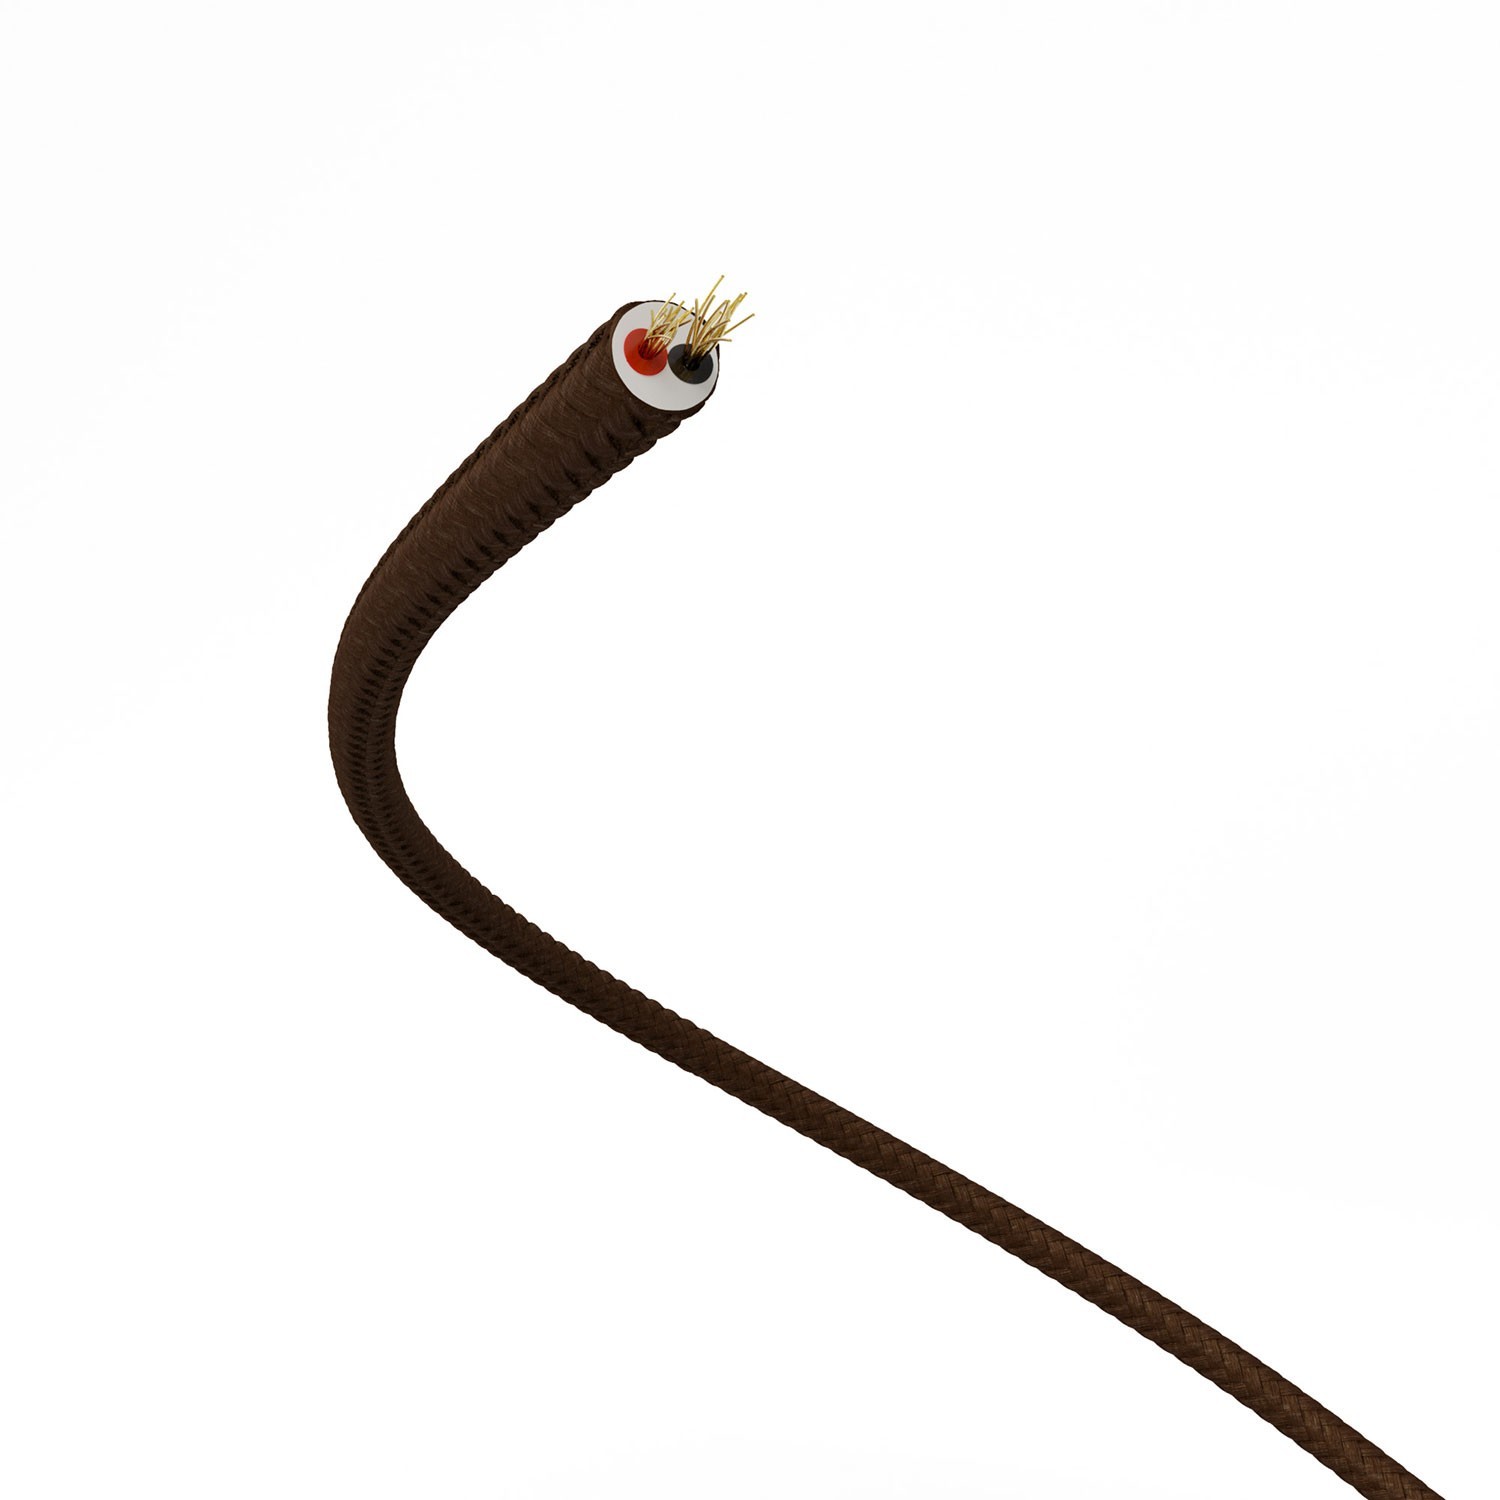 Extra Low Voltage power cable coated in silk effect fabric Brown RM13 - 50 m